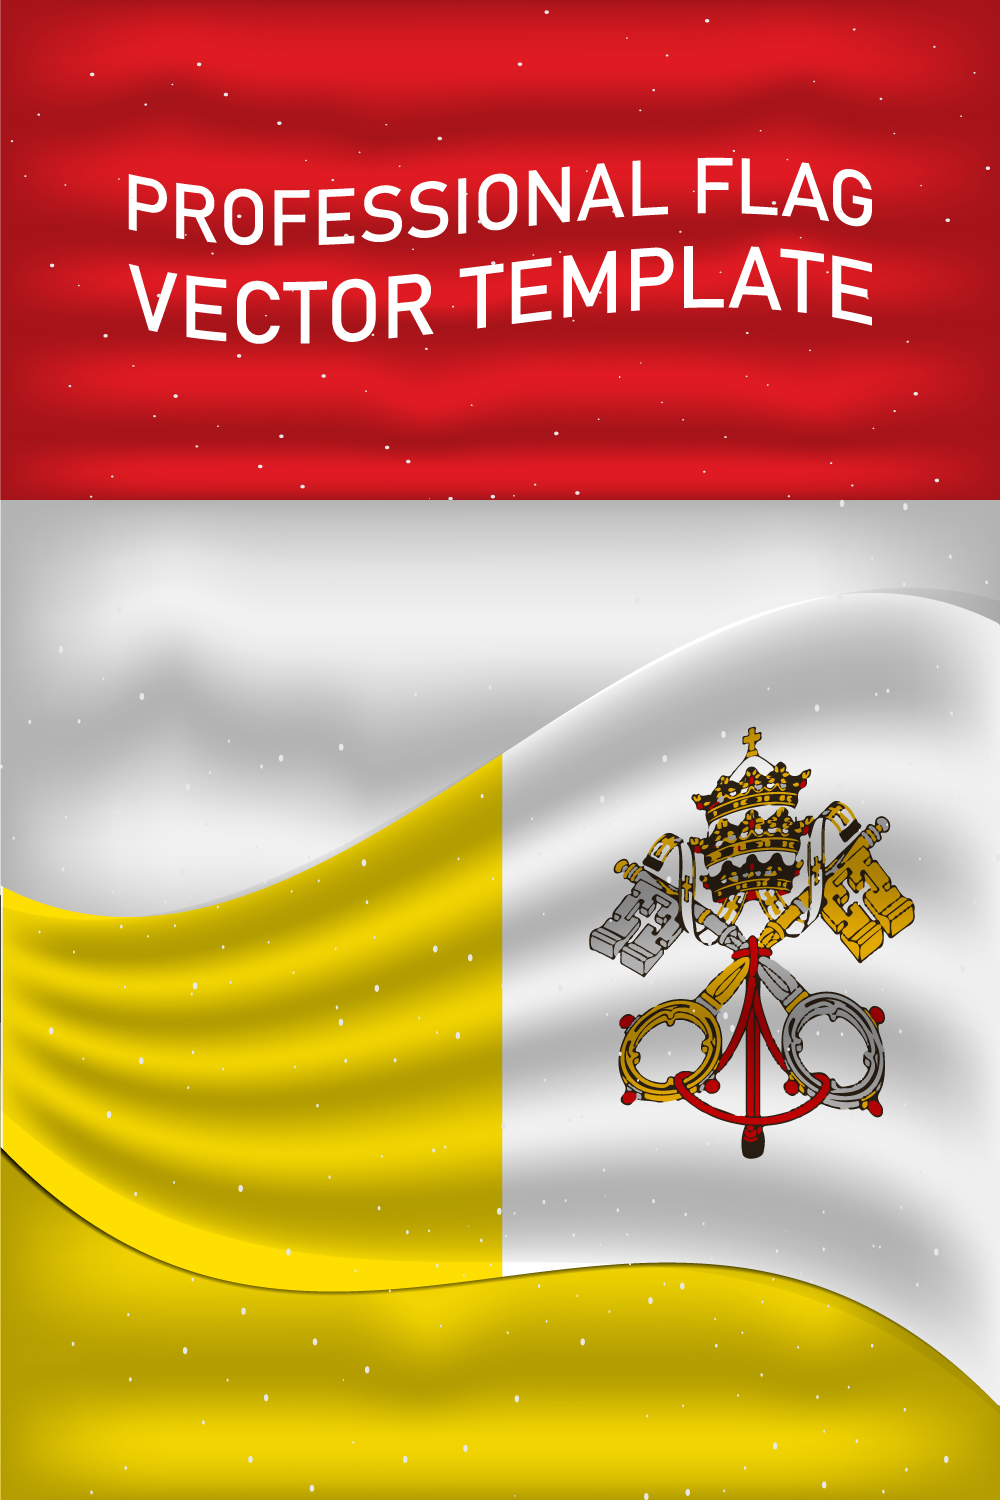 Irresistible image of the Vatican flag.